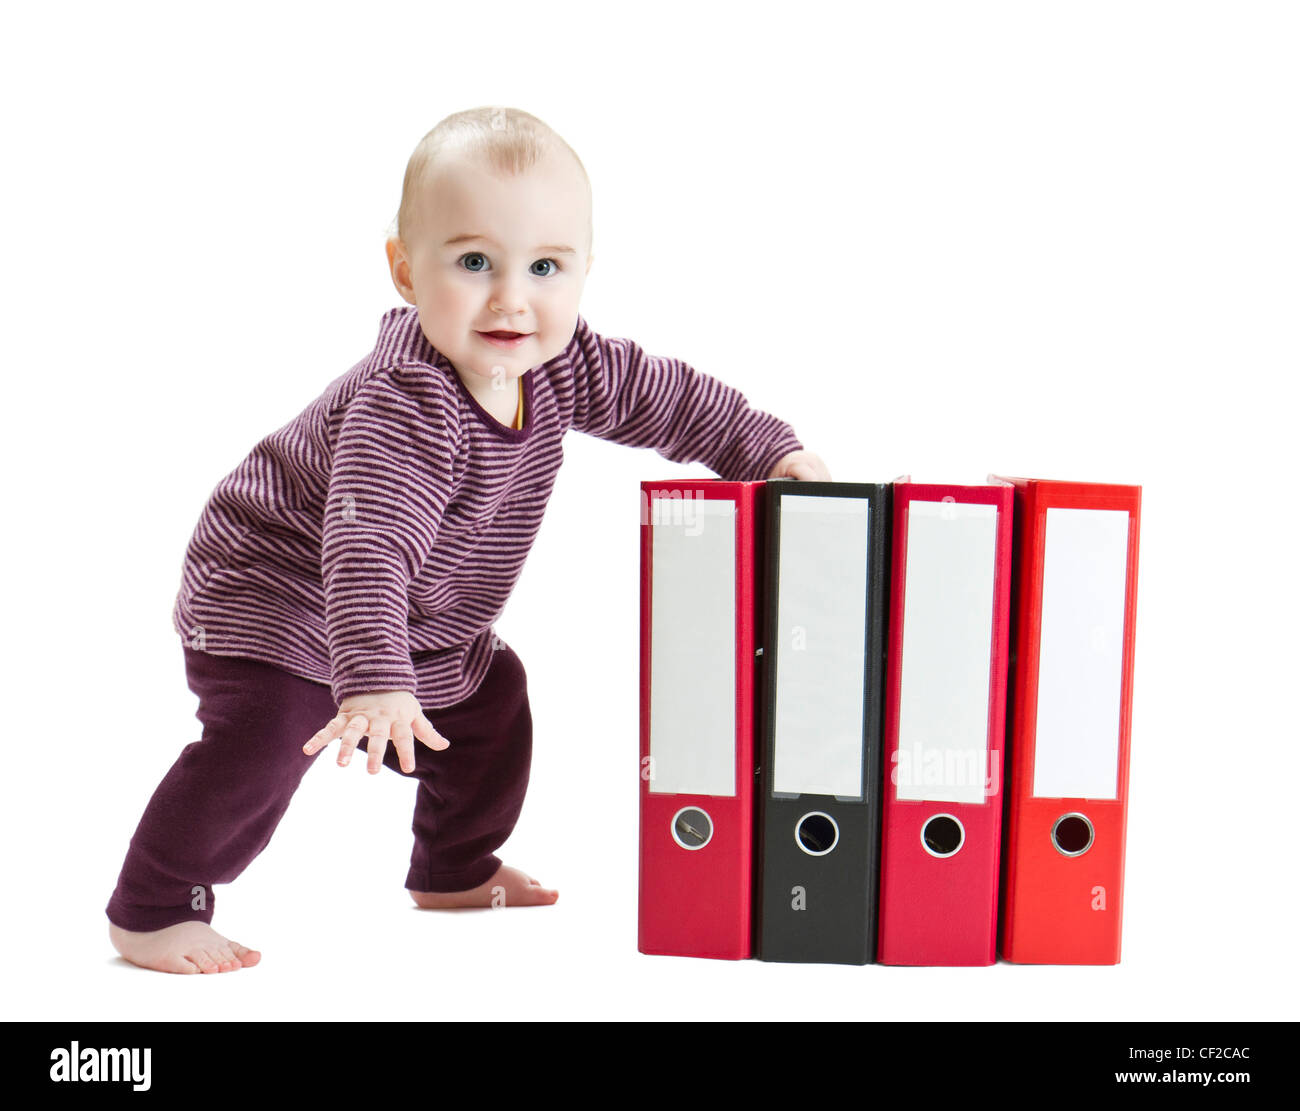 young child in light background with four ring files Stock Photo